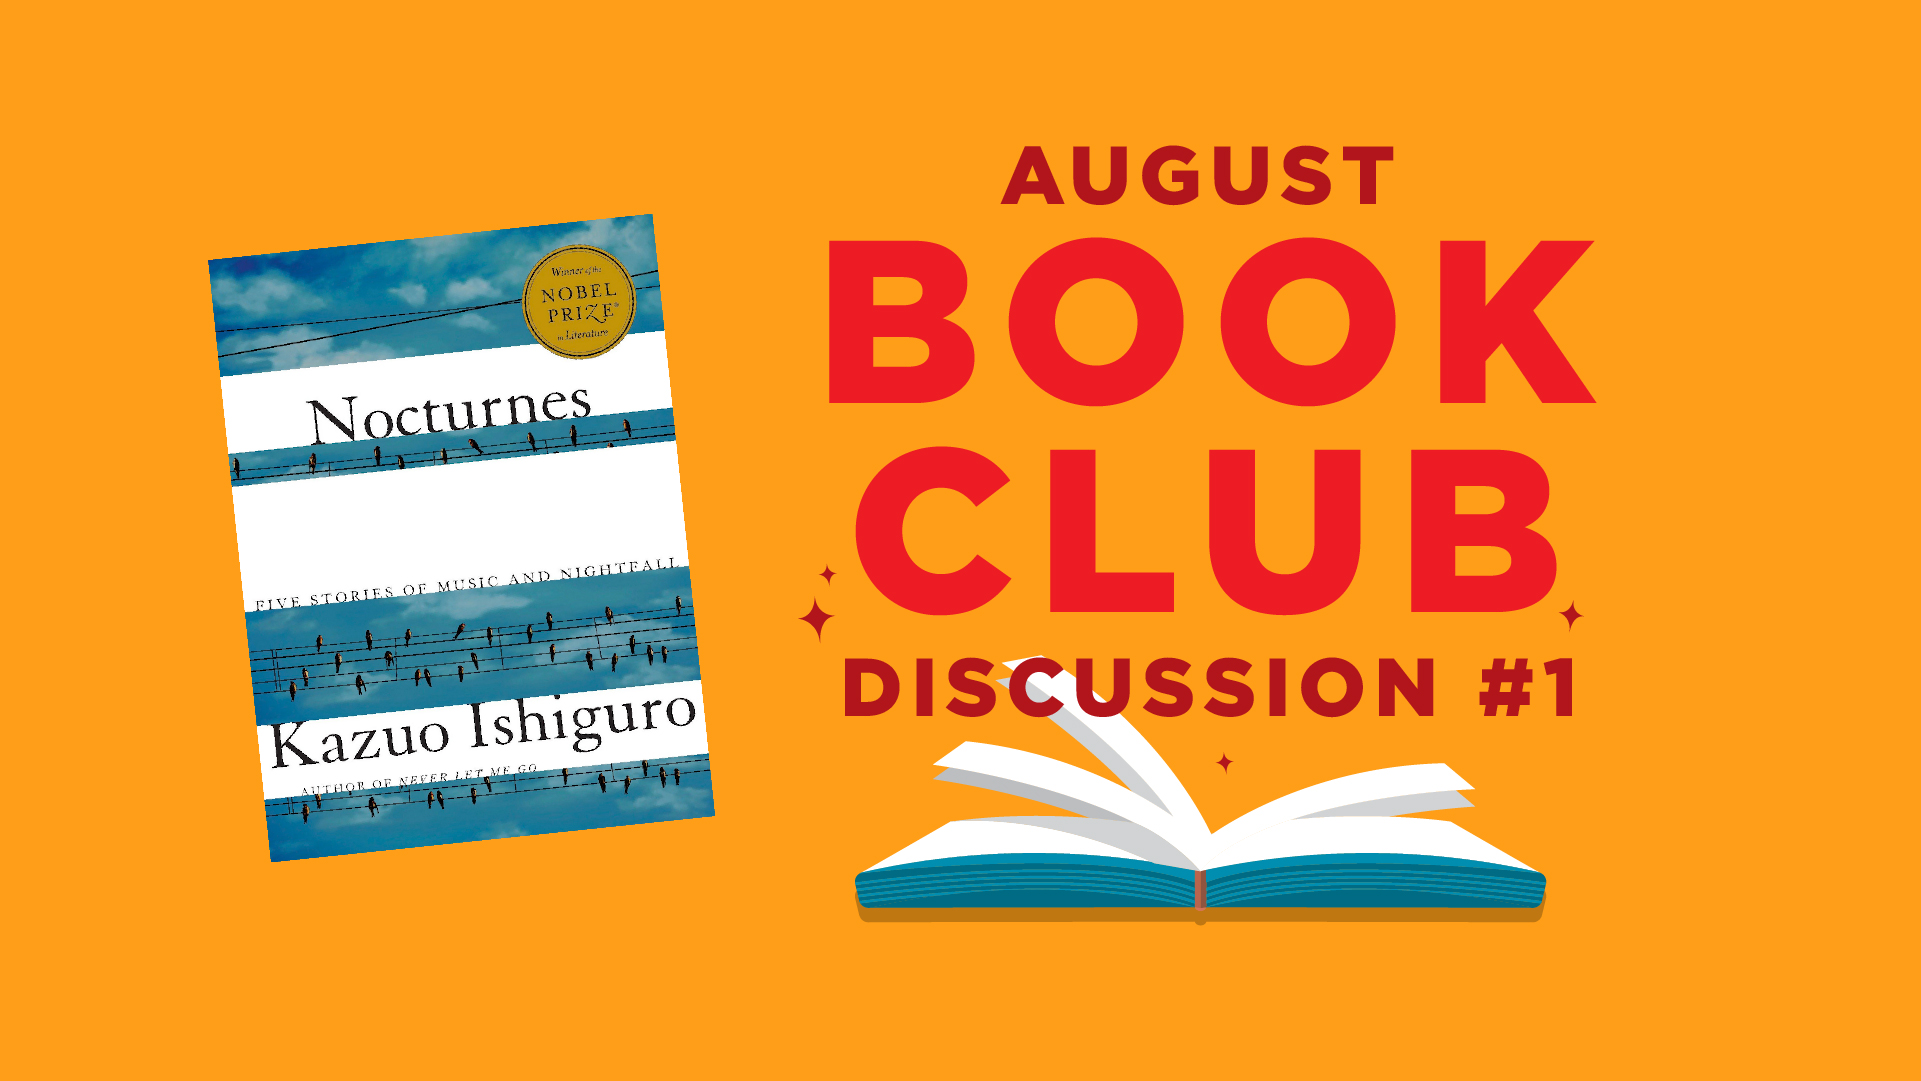 August Book Club Discussion #1 - Nocturnes by Kazuo Ishiguro